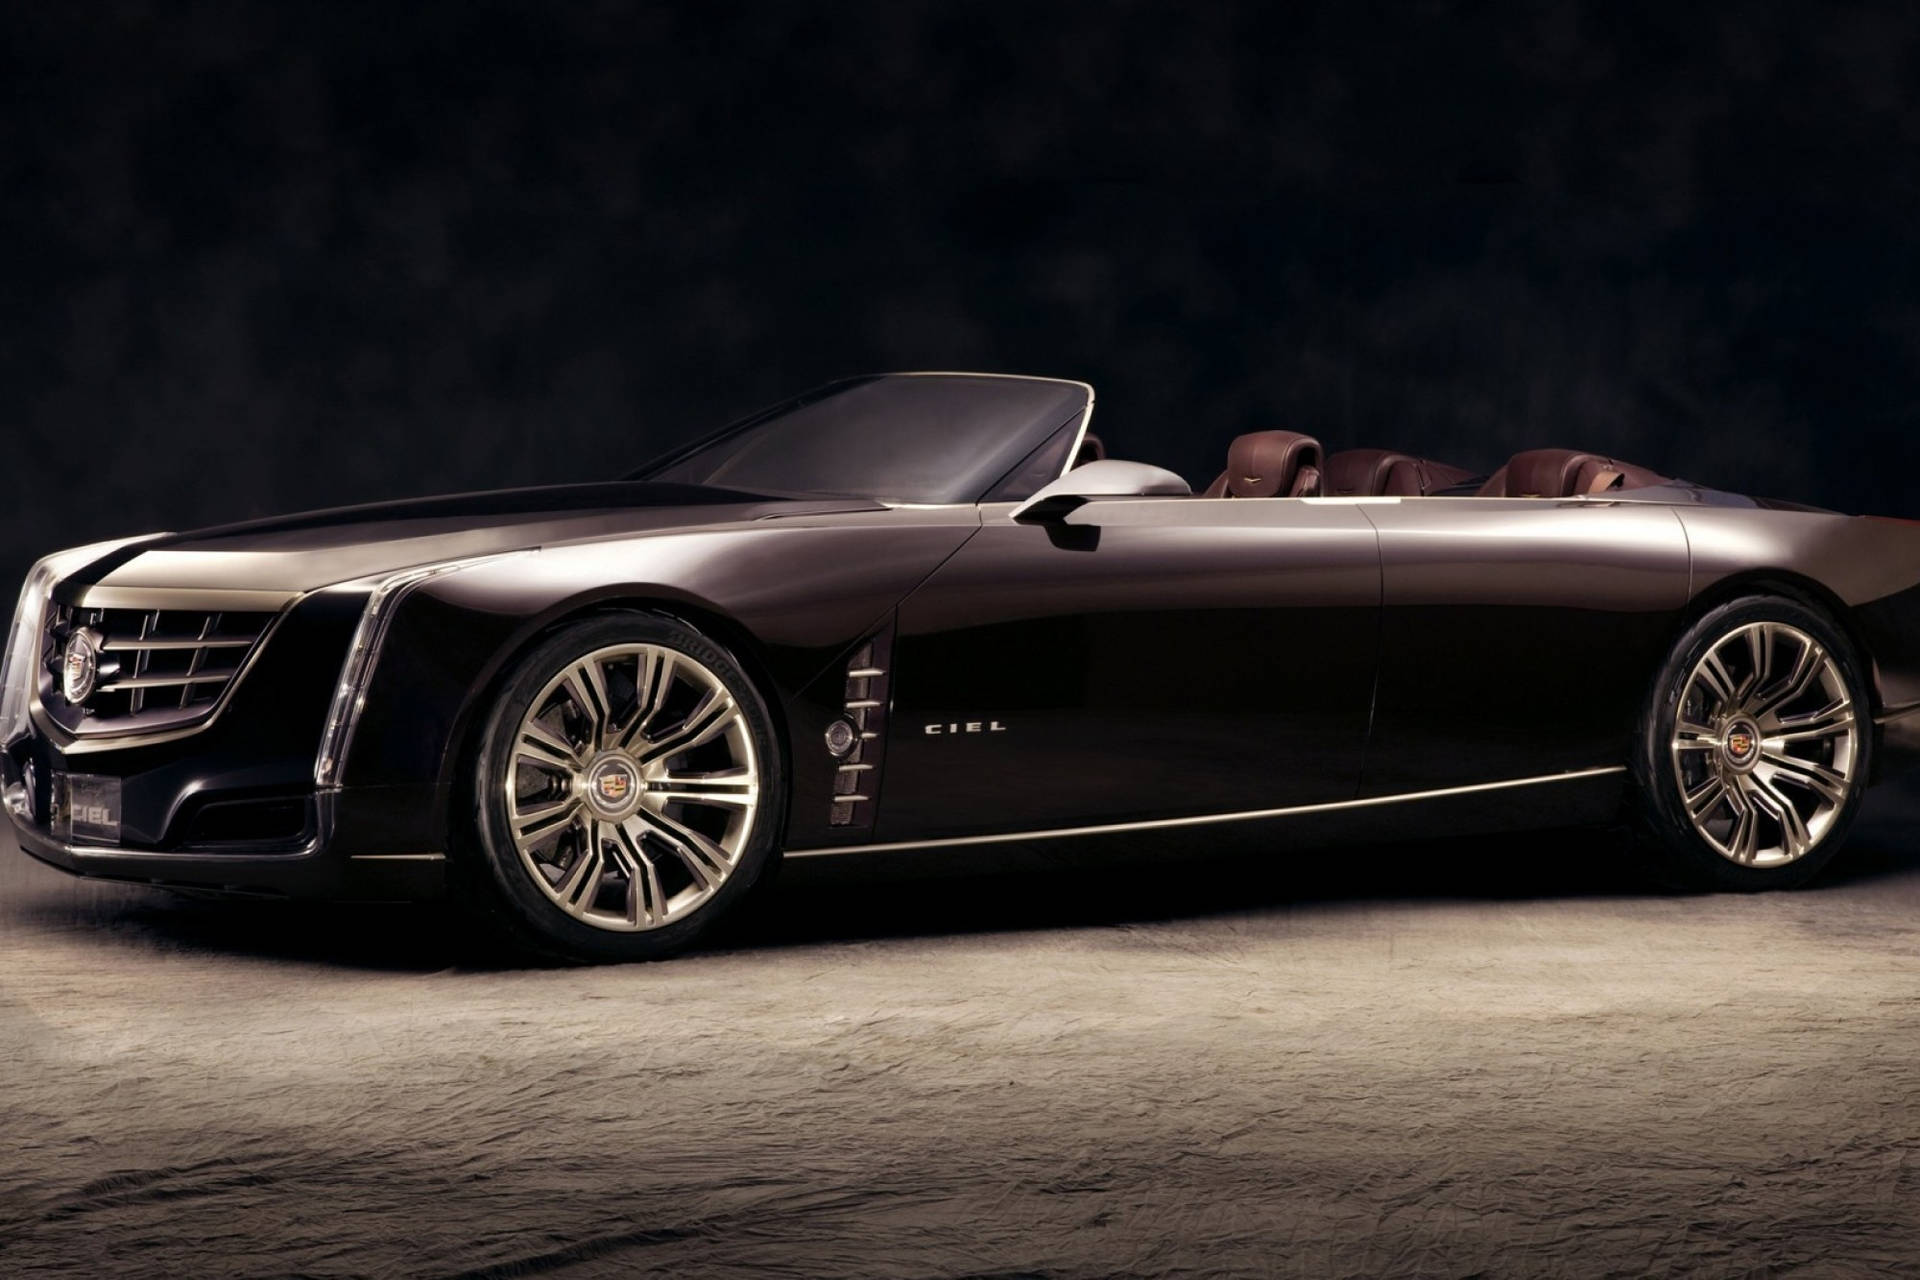 Luxury in Motion - Cadillac Convertible Wallpaper